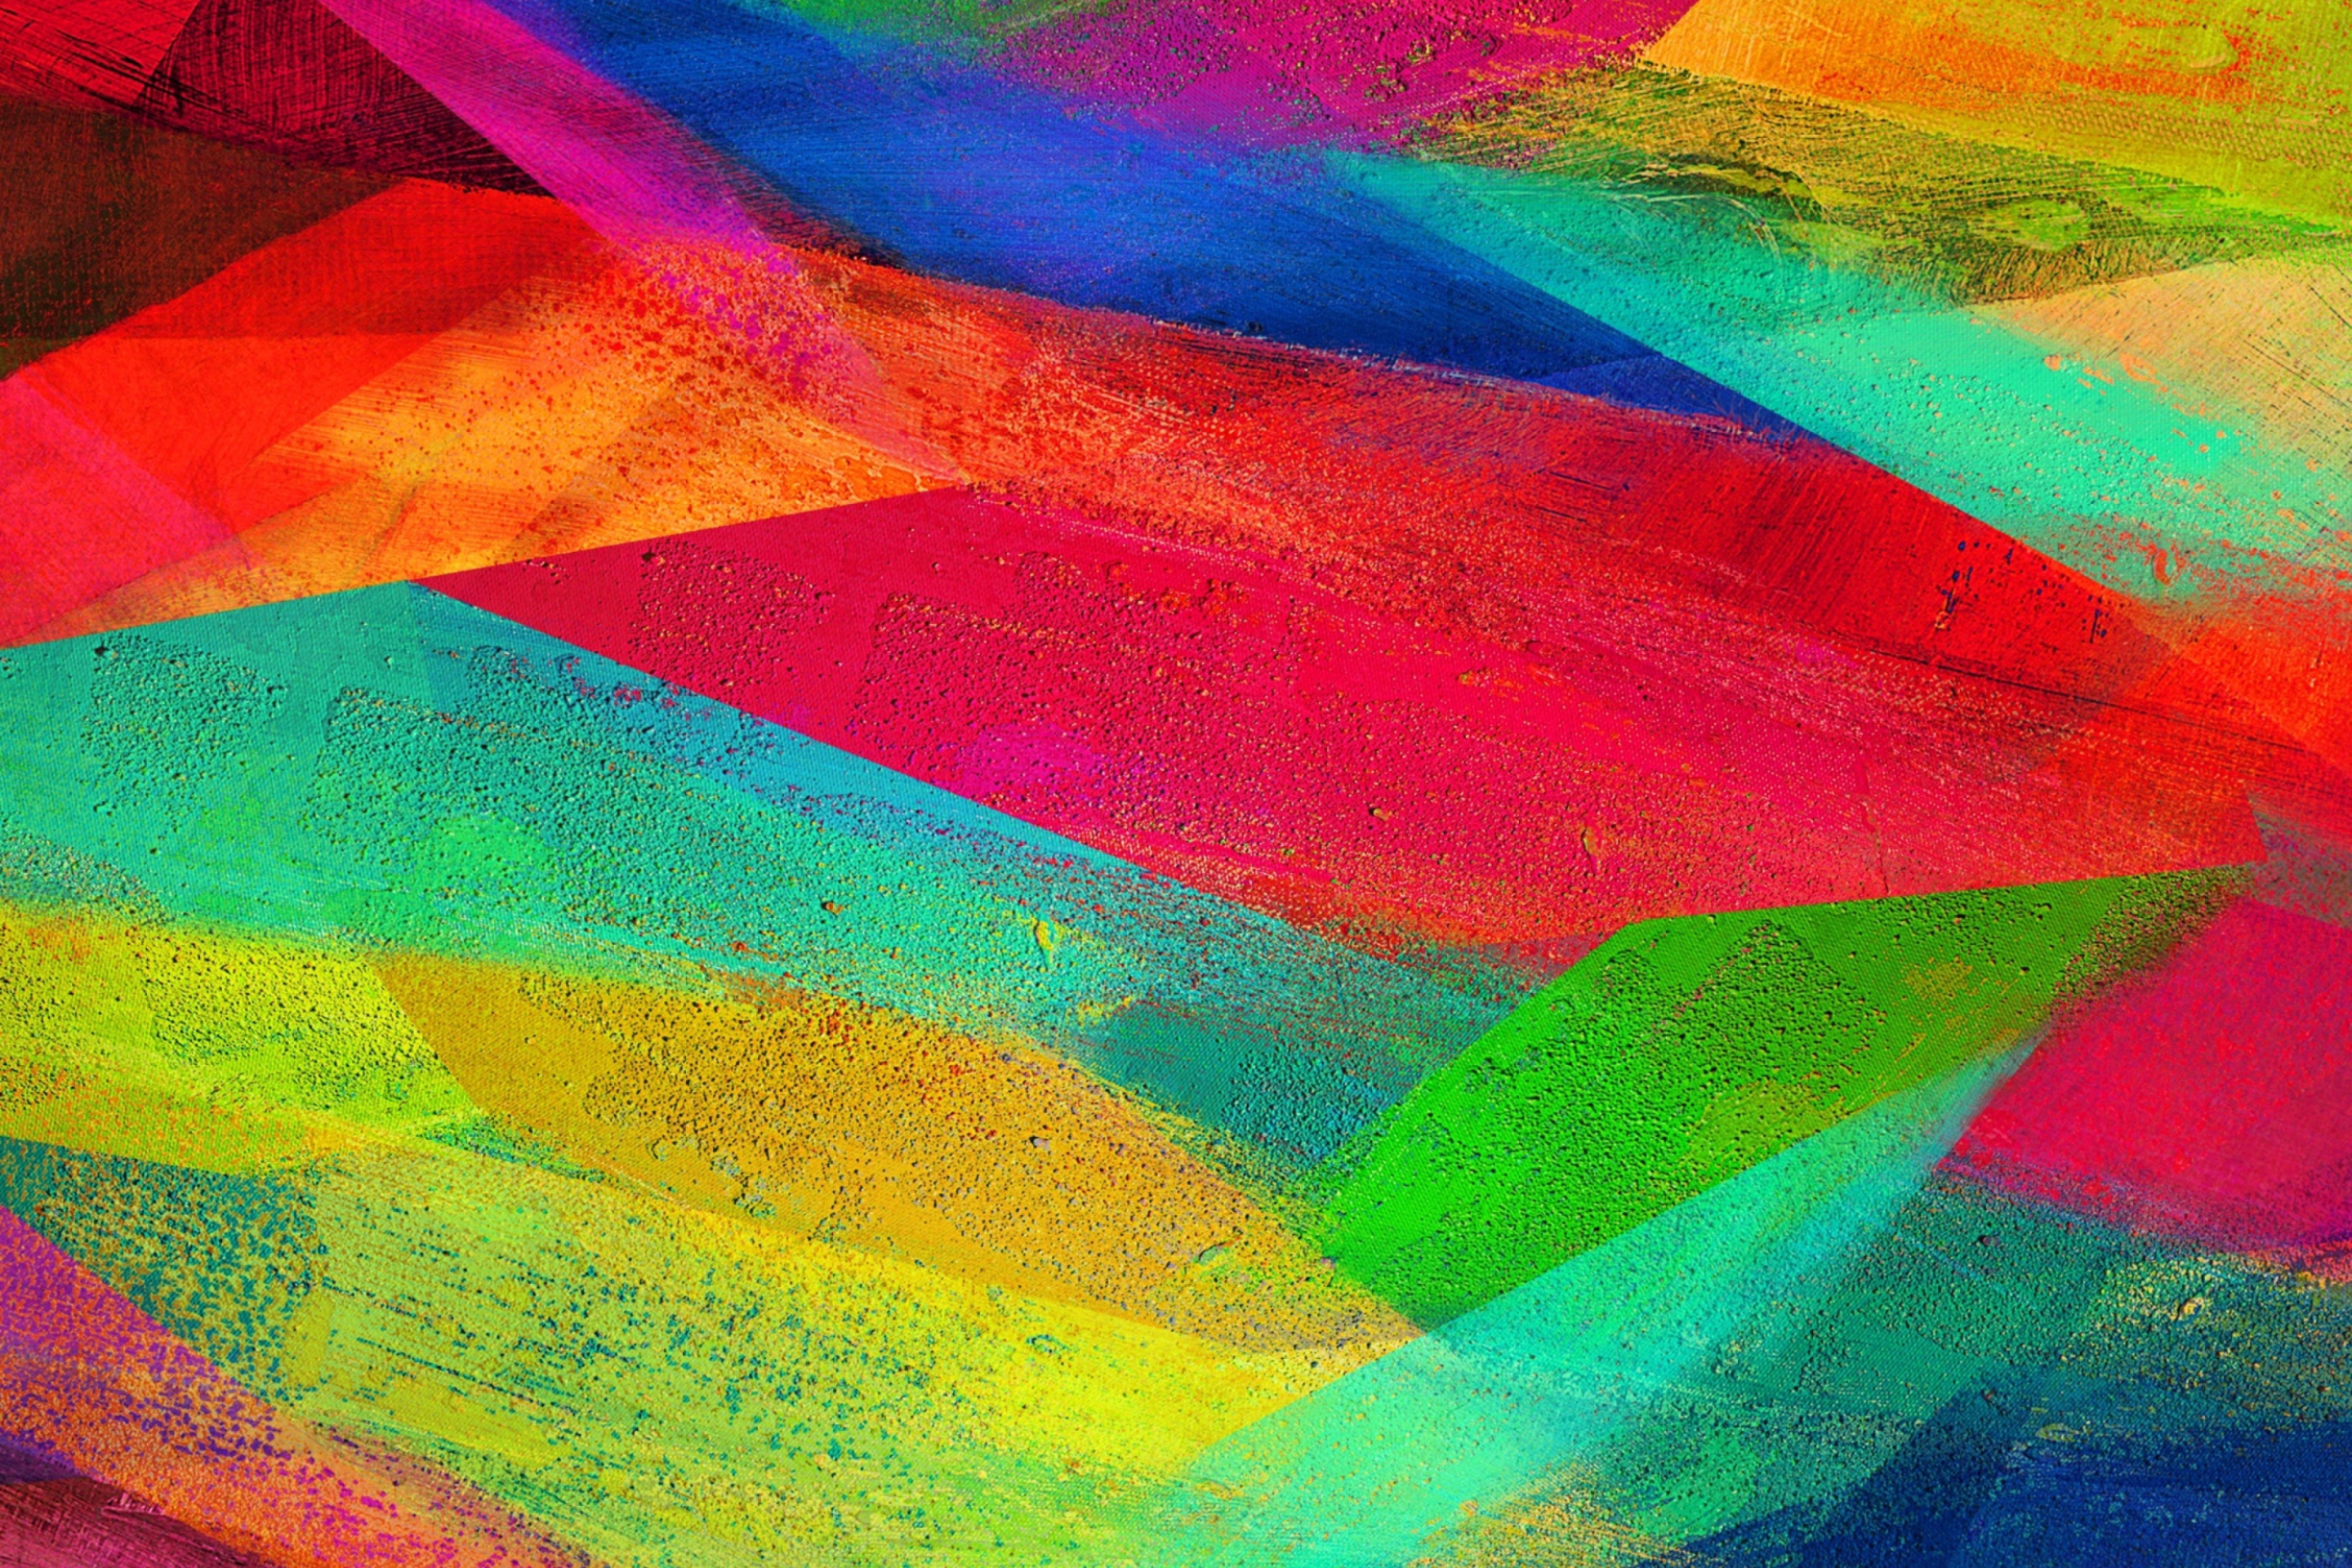 Colorful Samsung Galaxy Note 4 wallpaper 2880x1920